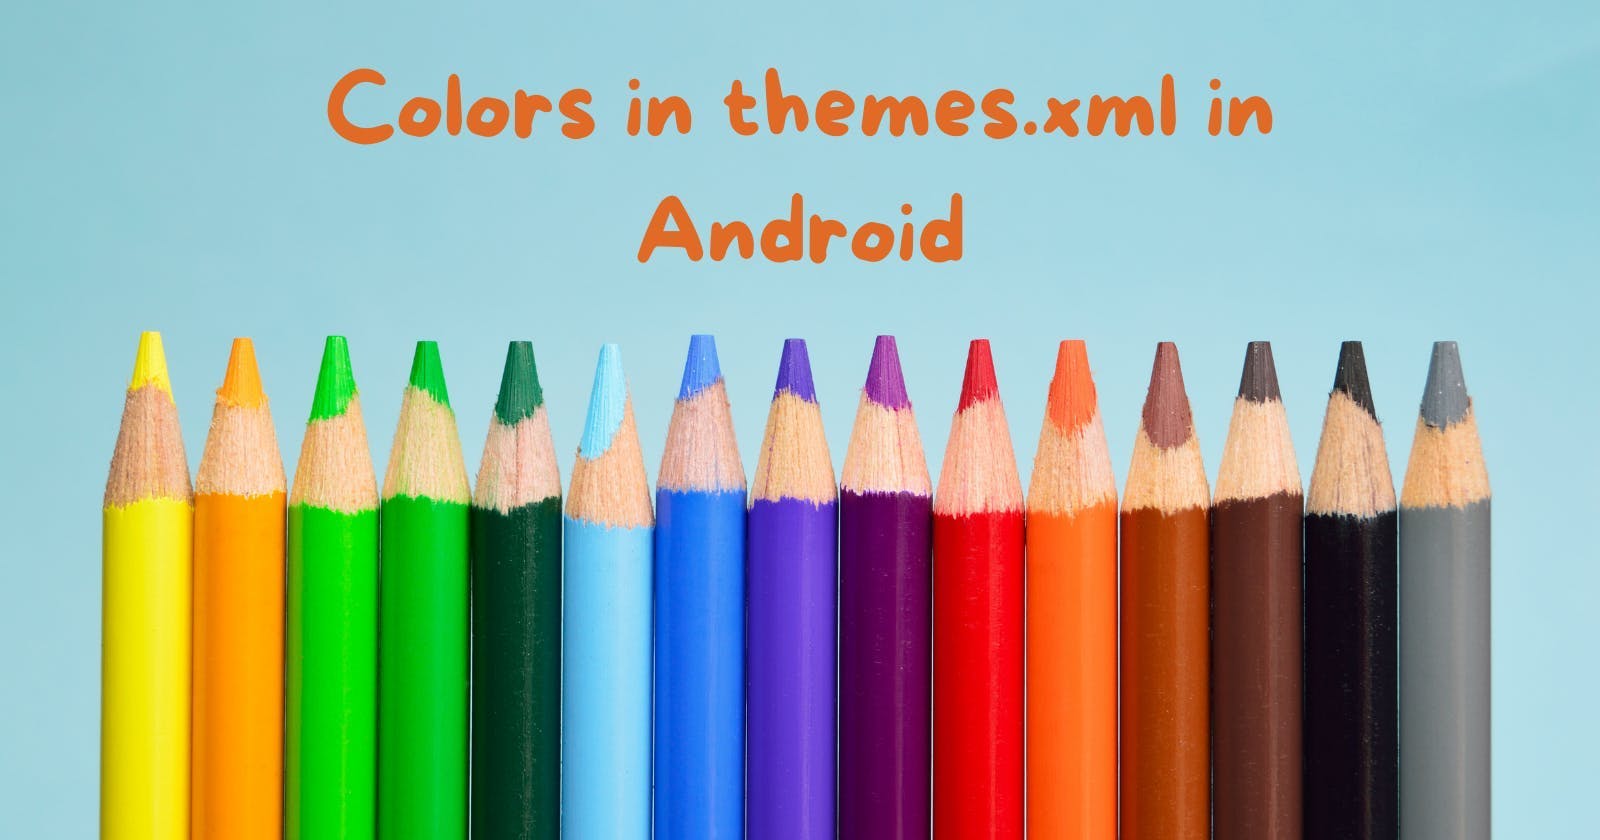 Colors in themes.xml in Android